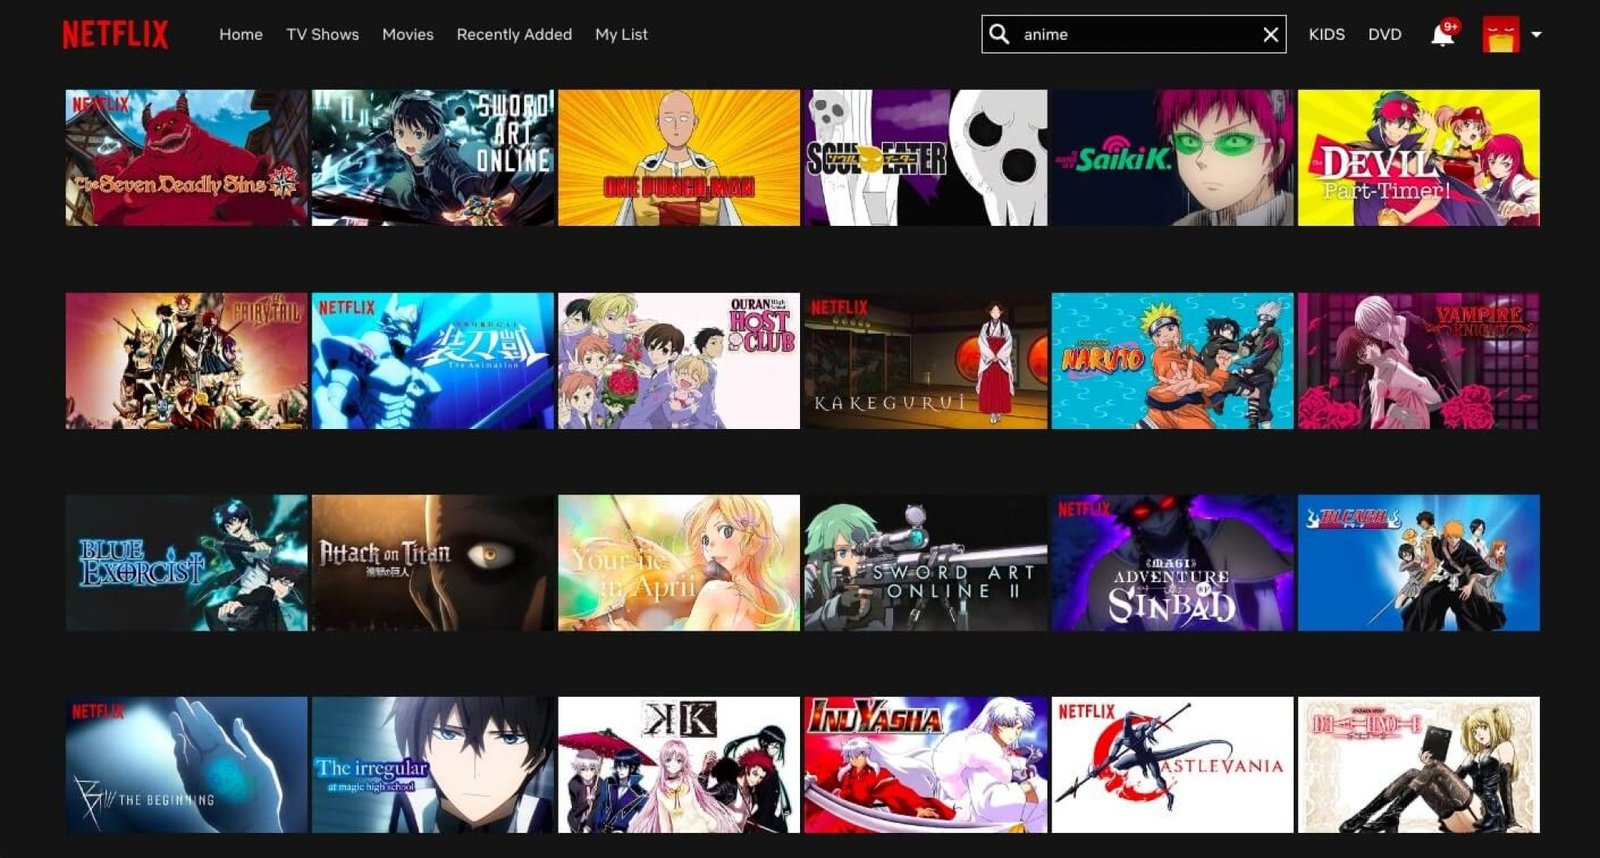 Top 10 Anime Apps To Watch Anime Online - Anime Rankers